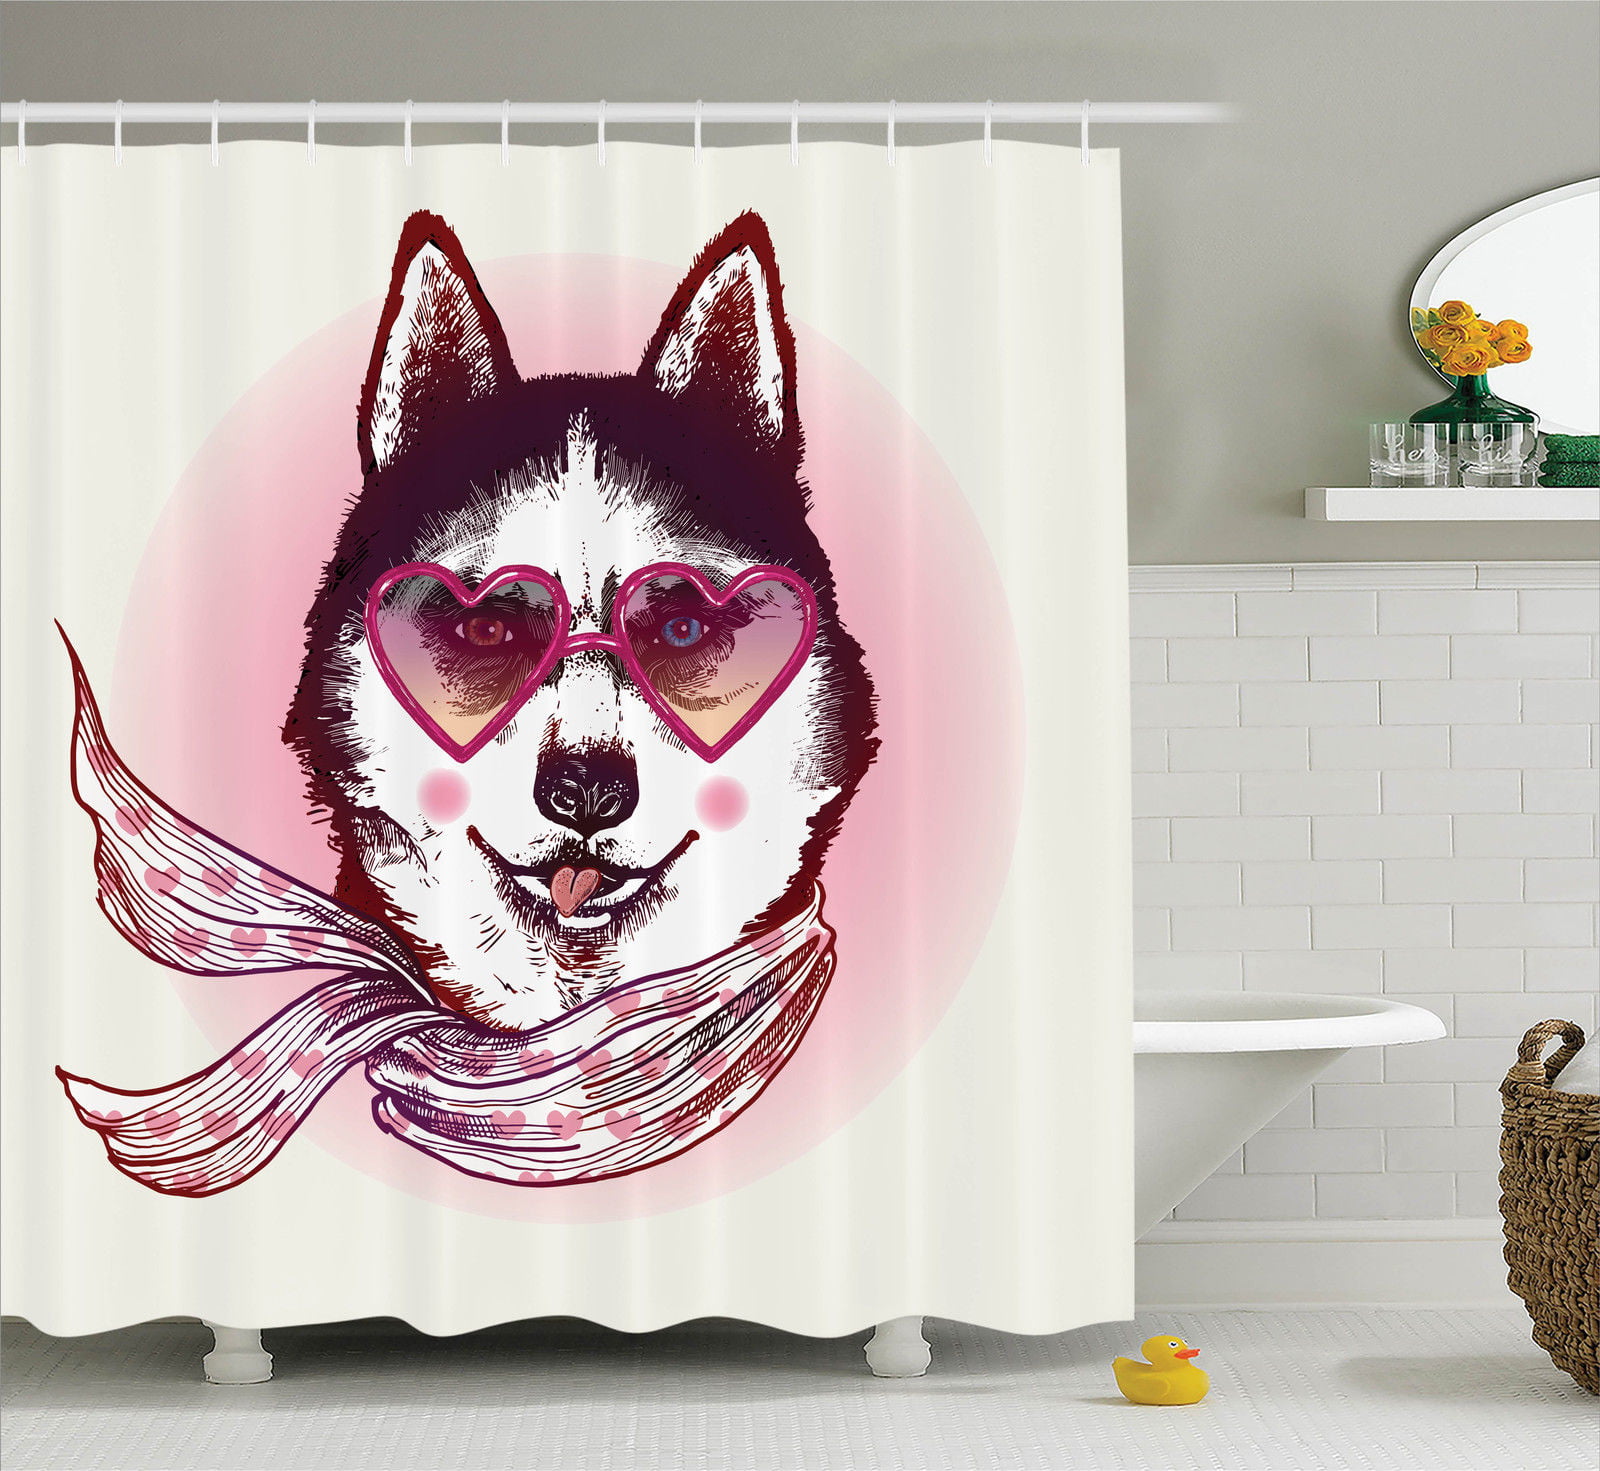 Details about   Animals Dog Lion Extra Long Art Decor Shower Curtain Waterproof Polyester Fabric 